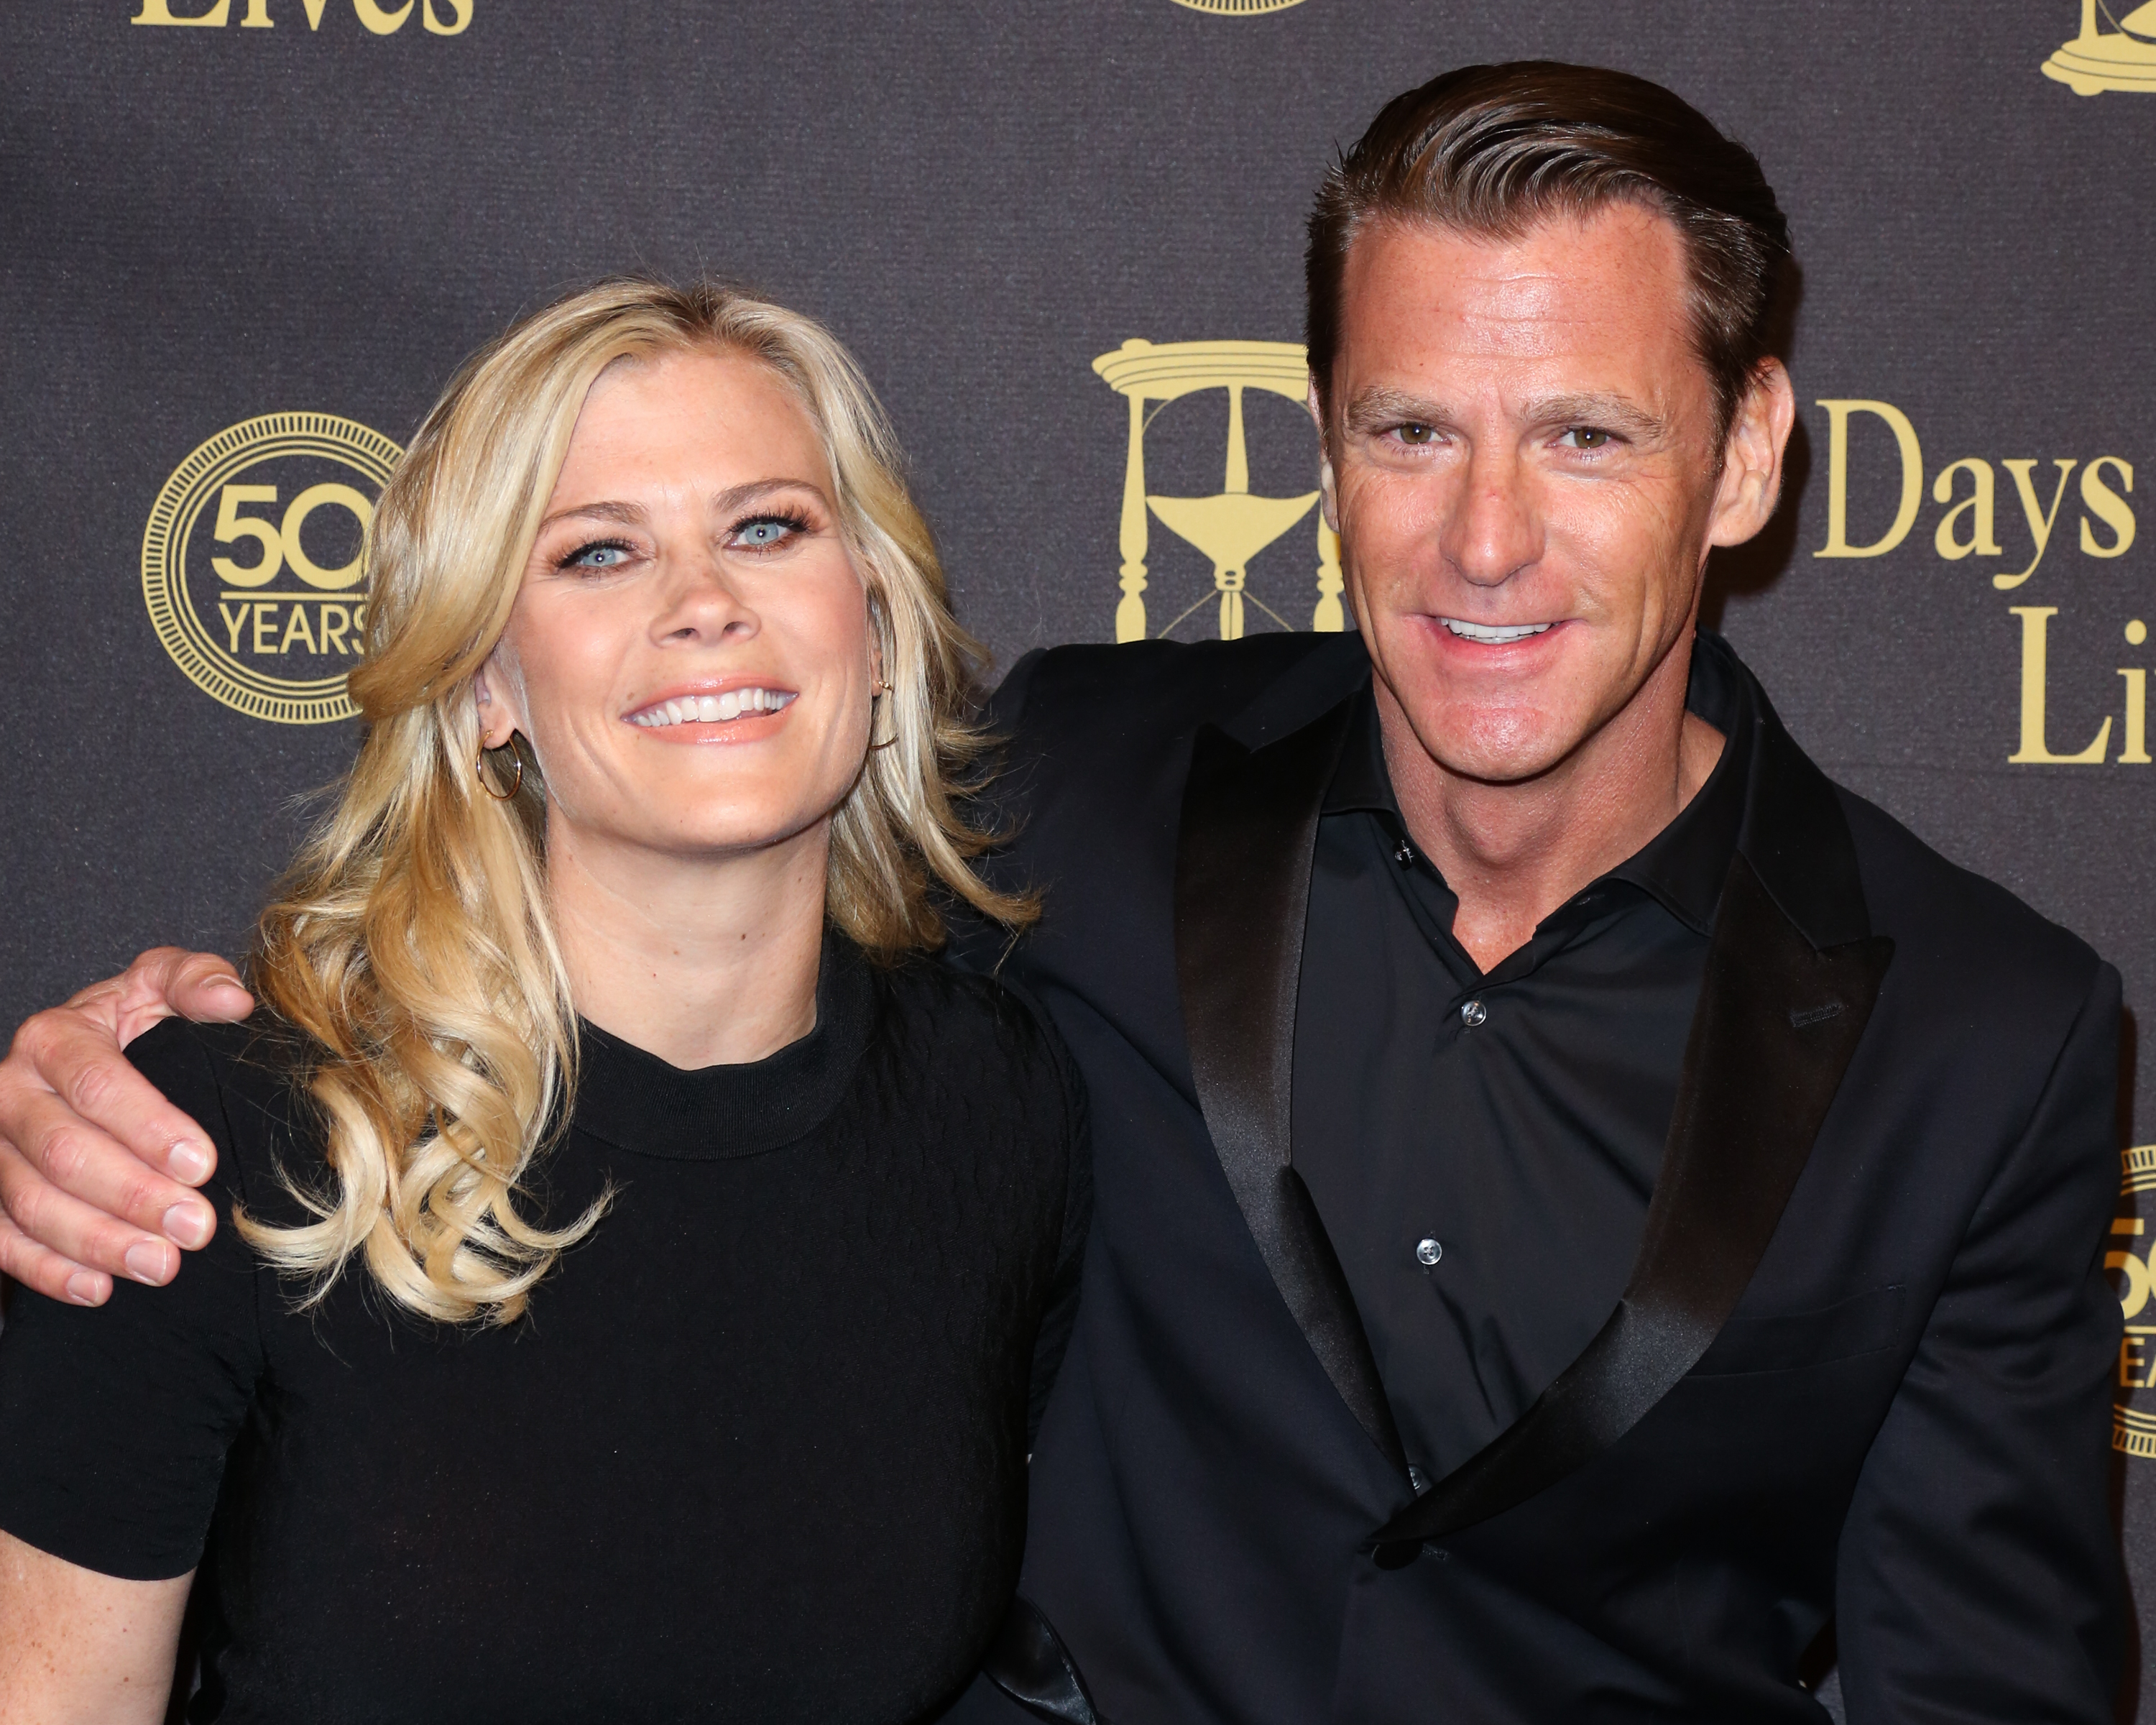 Alison Sweeney and David Sanov at Hollywood Palladium on November 7, 2015, in Los Angeles, California. | Source: Getty Images